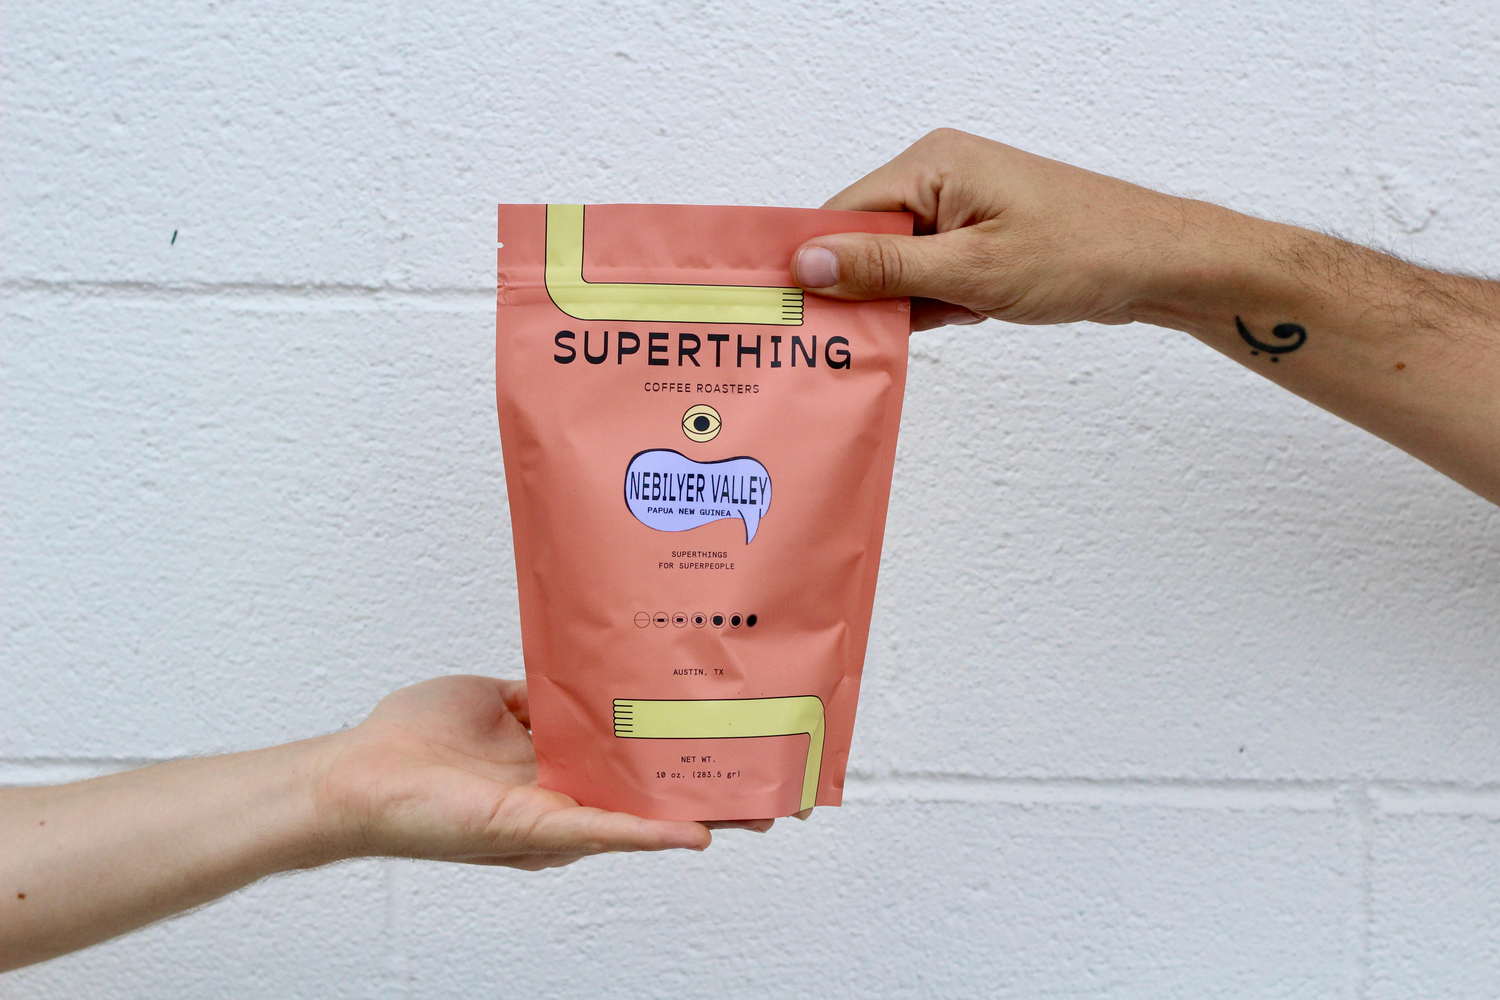 Coffee is a Super Thing